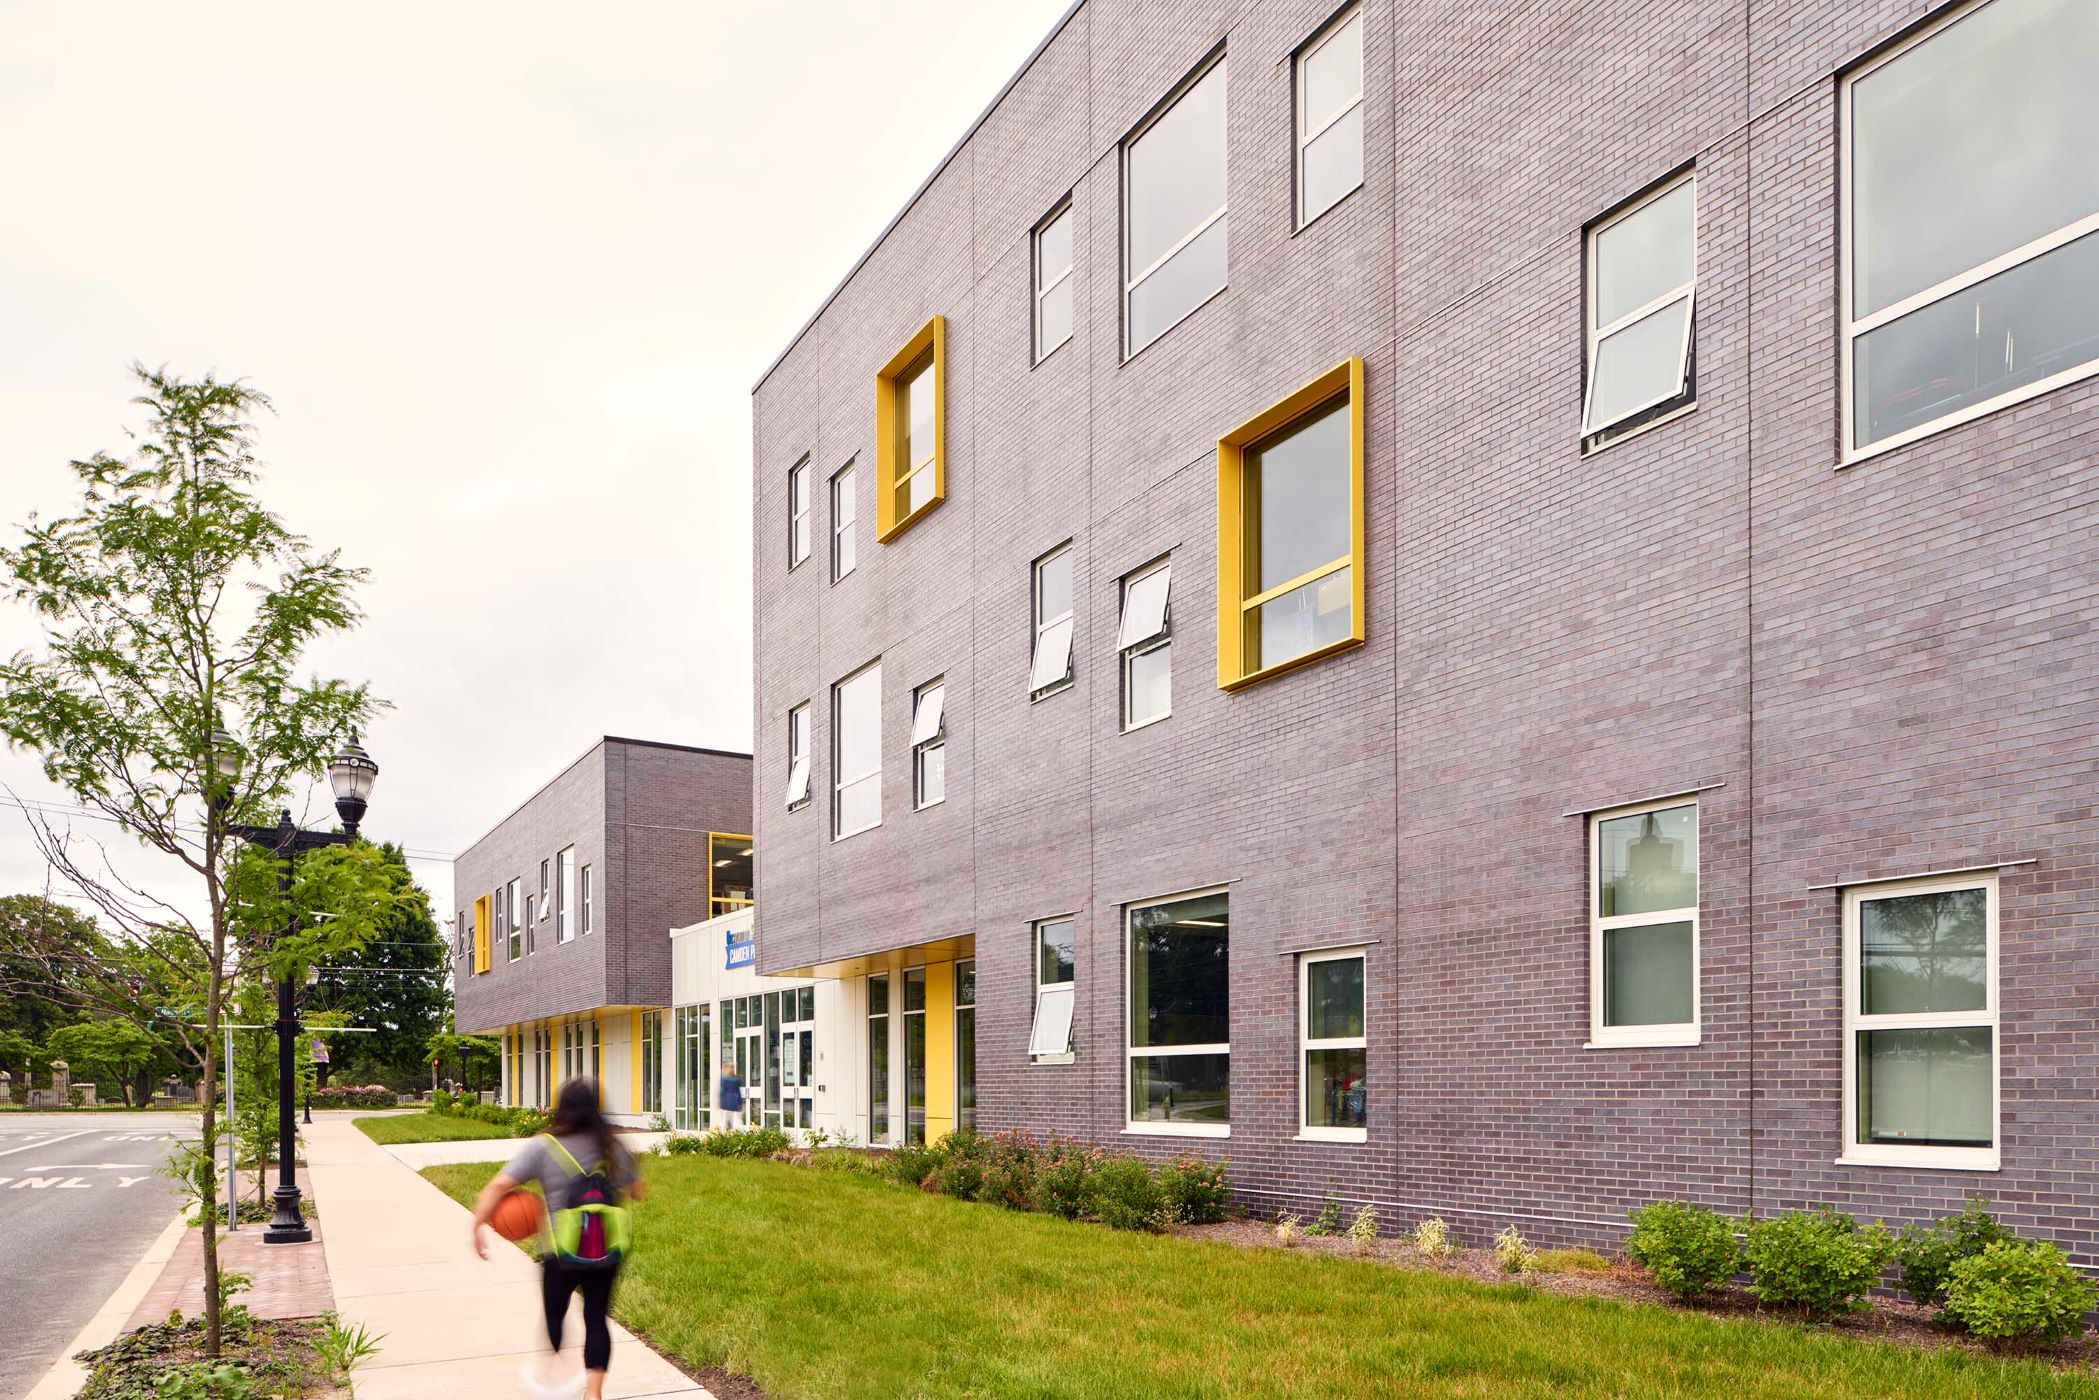 building with yellow windows and a kid walking on the sidewalk